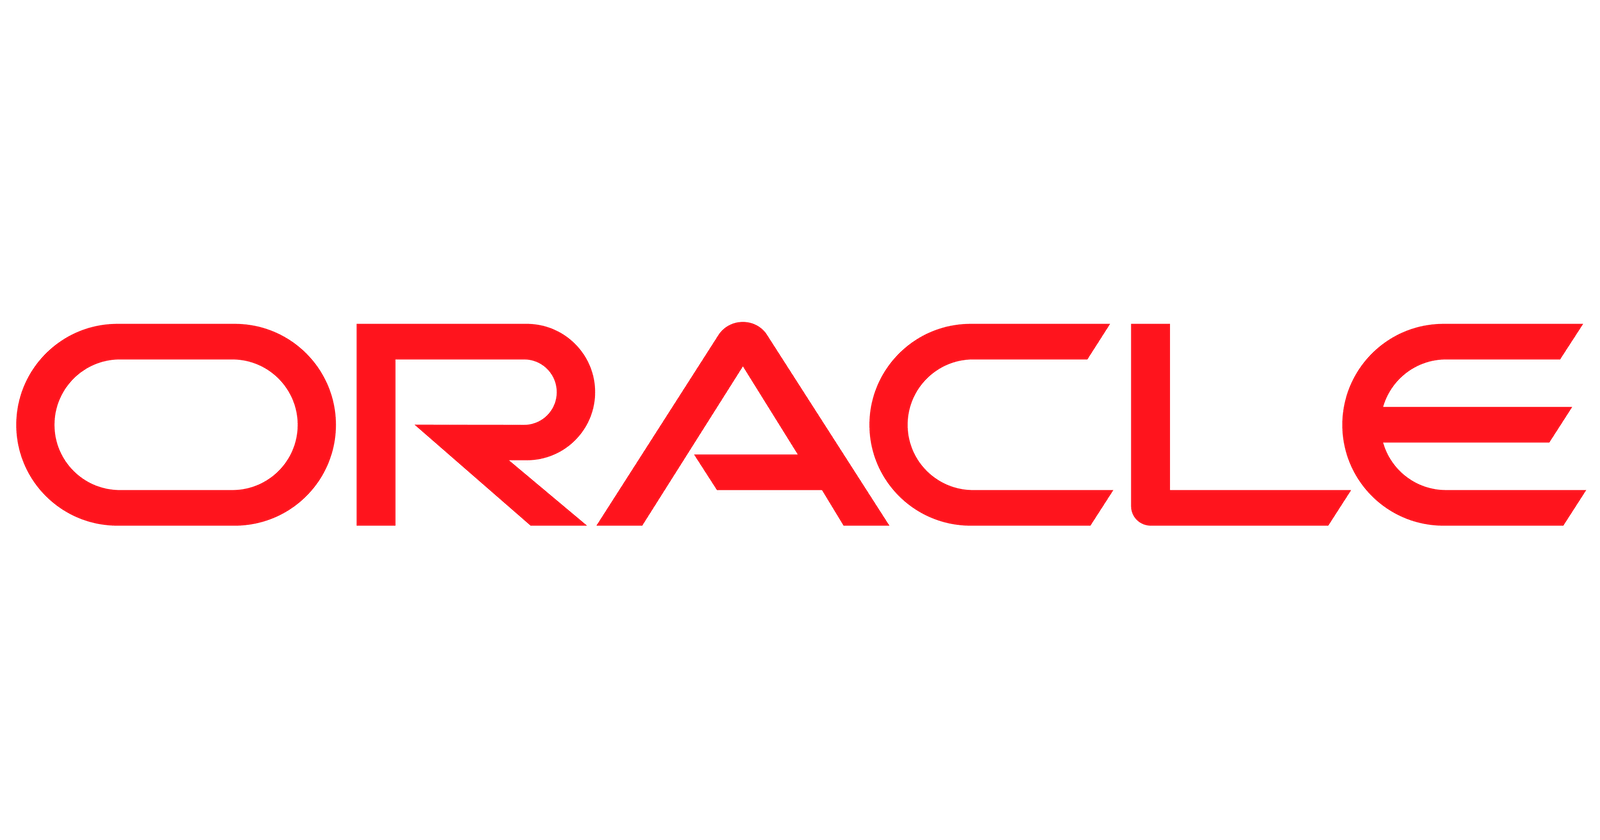 ORA-24247 - network access denied by access control list (ACL)